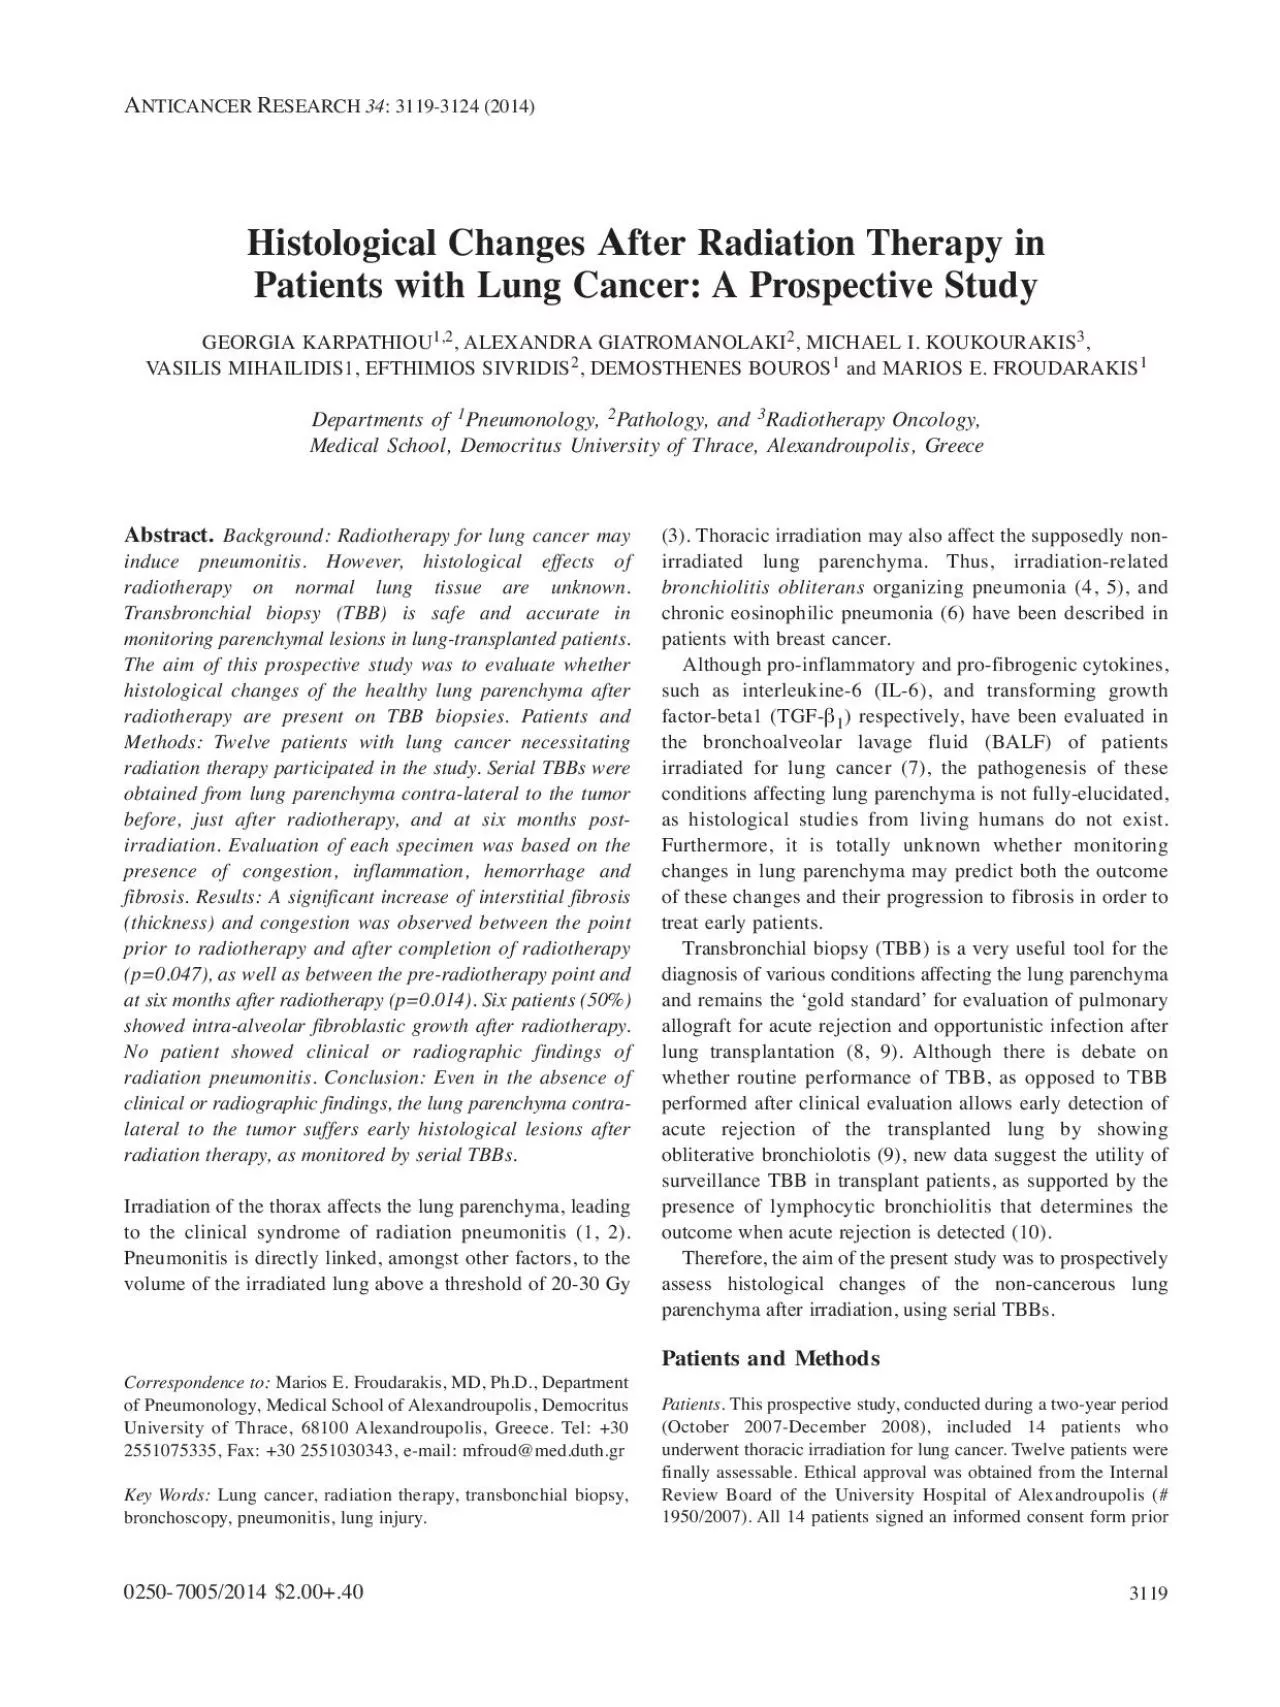 Abstract Background Radiotherapy for lung cancer mayinduce pneumonit